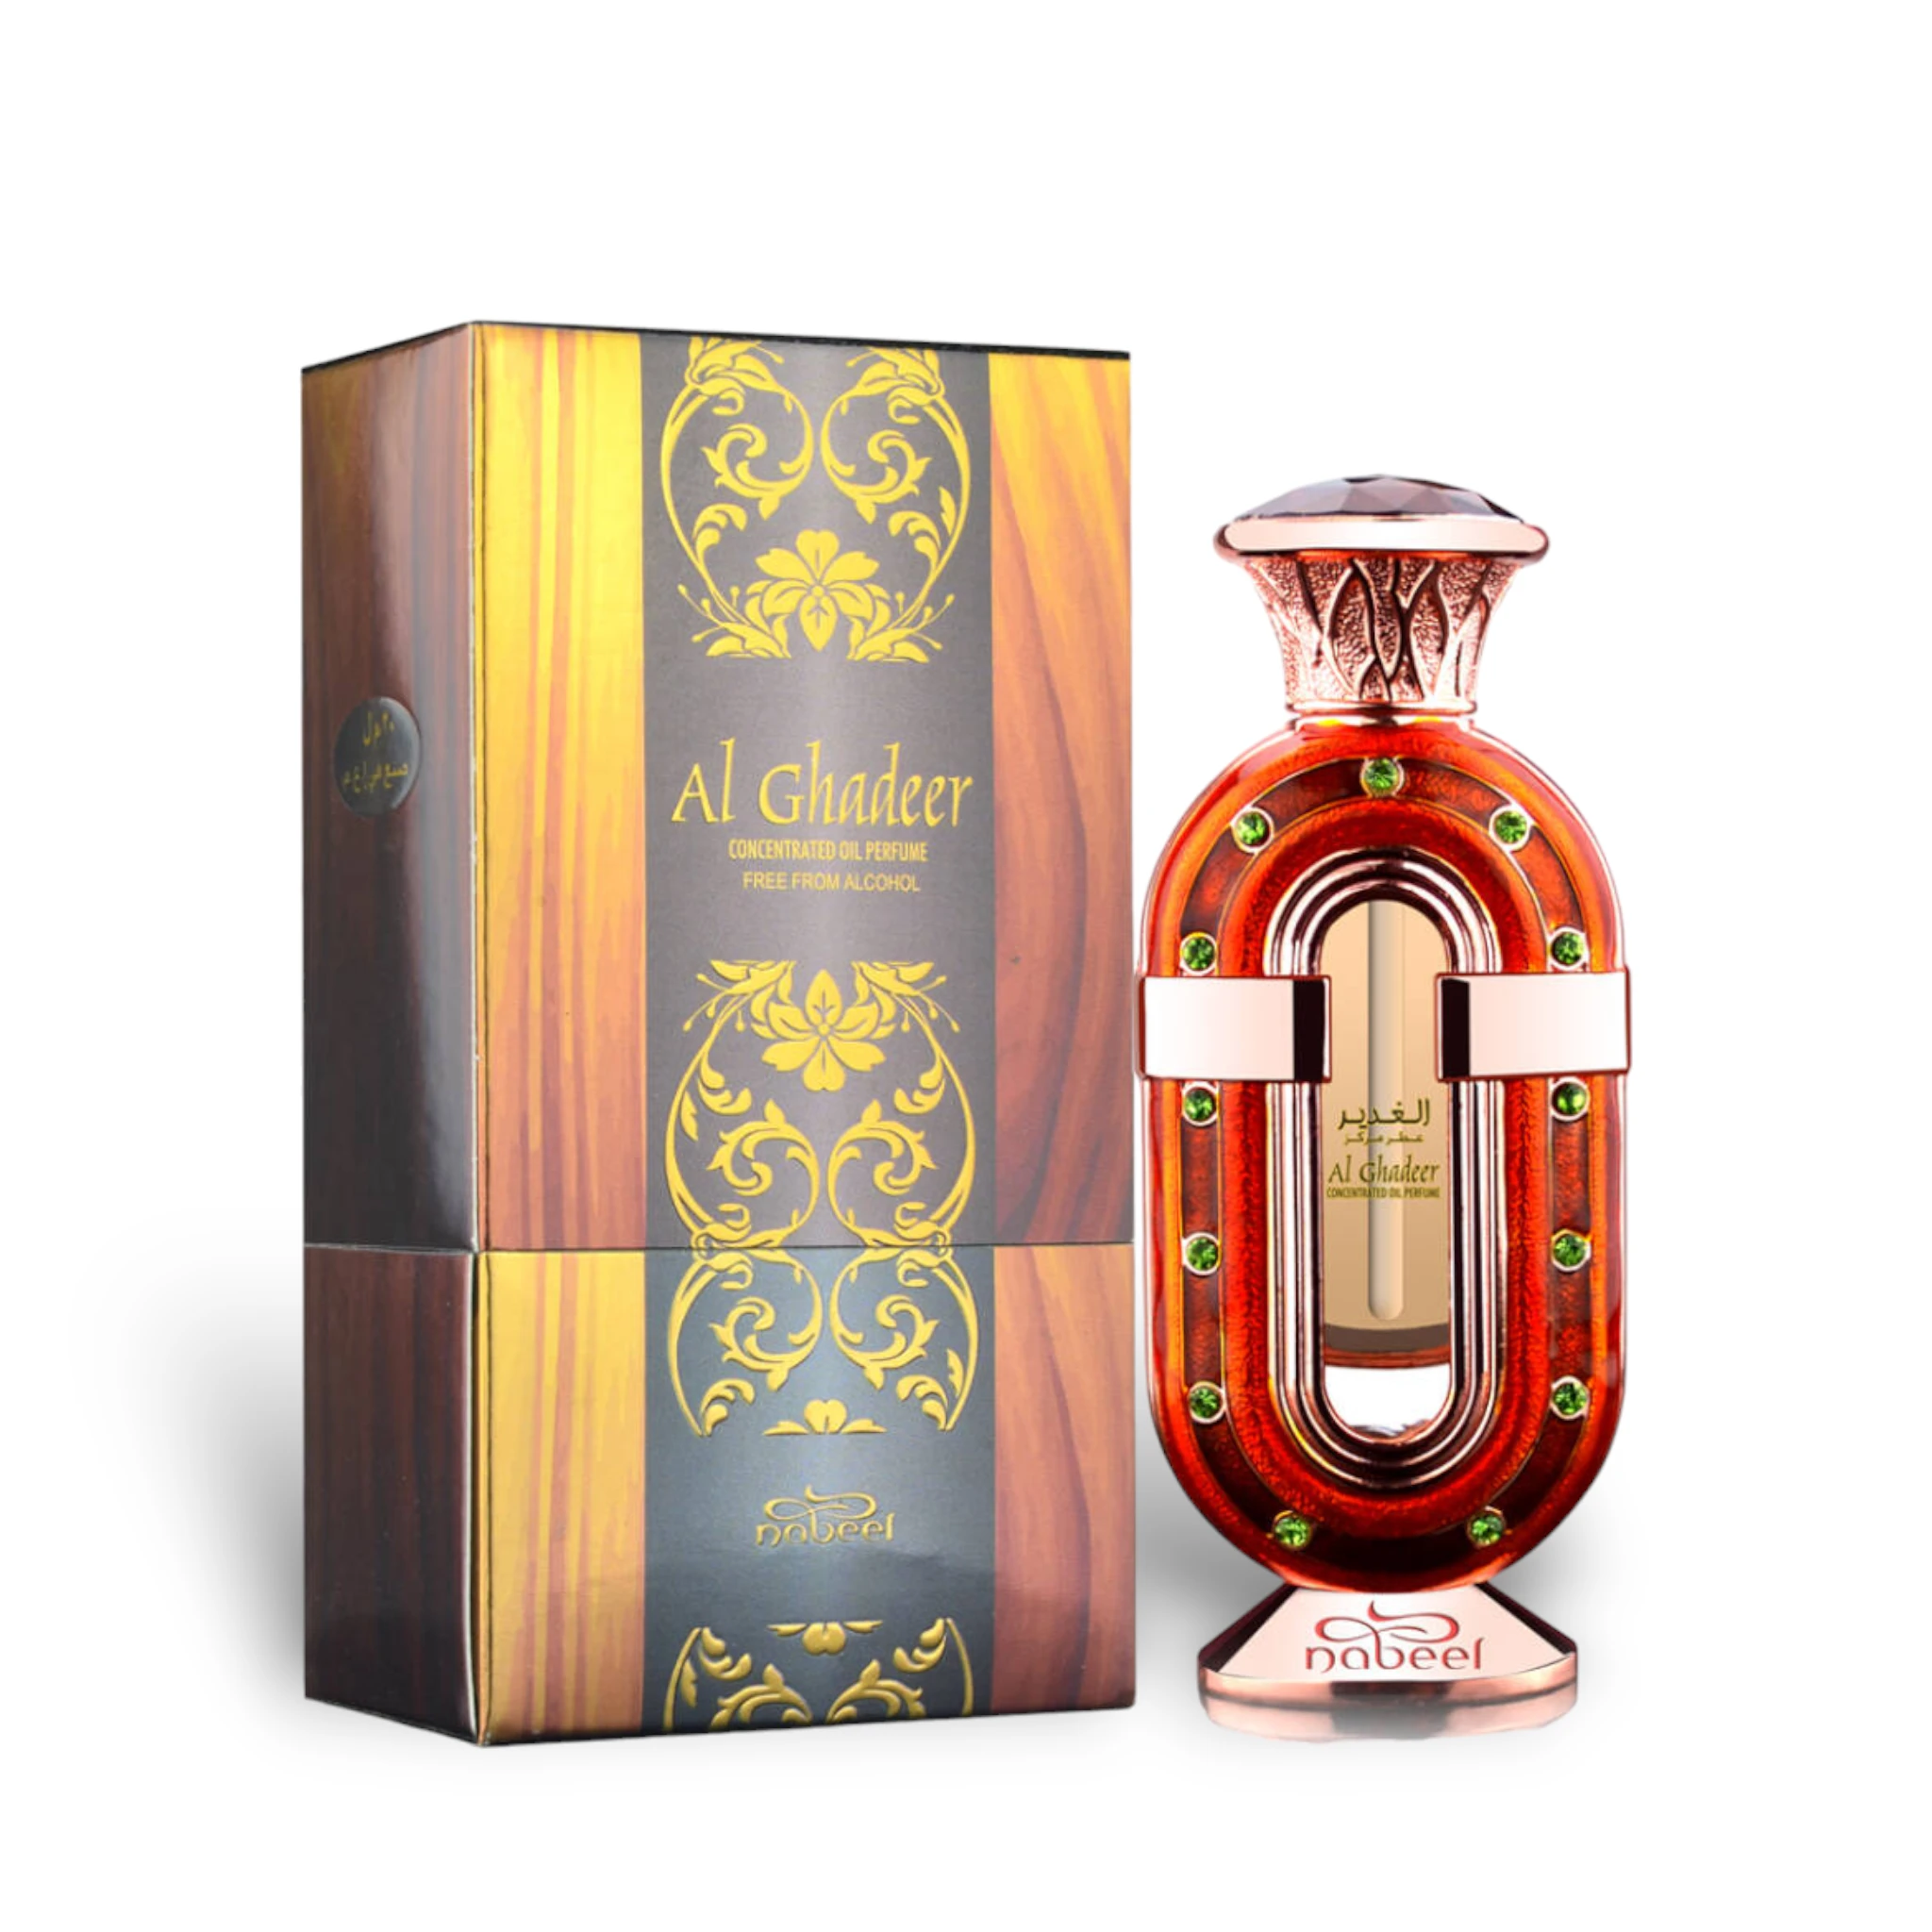 Al Ghadeer Concentrated Perfume Oil Attar 20Ml By Nabeel